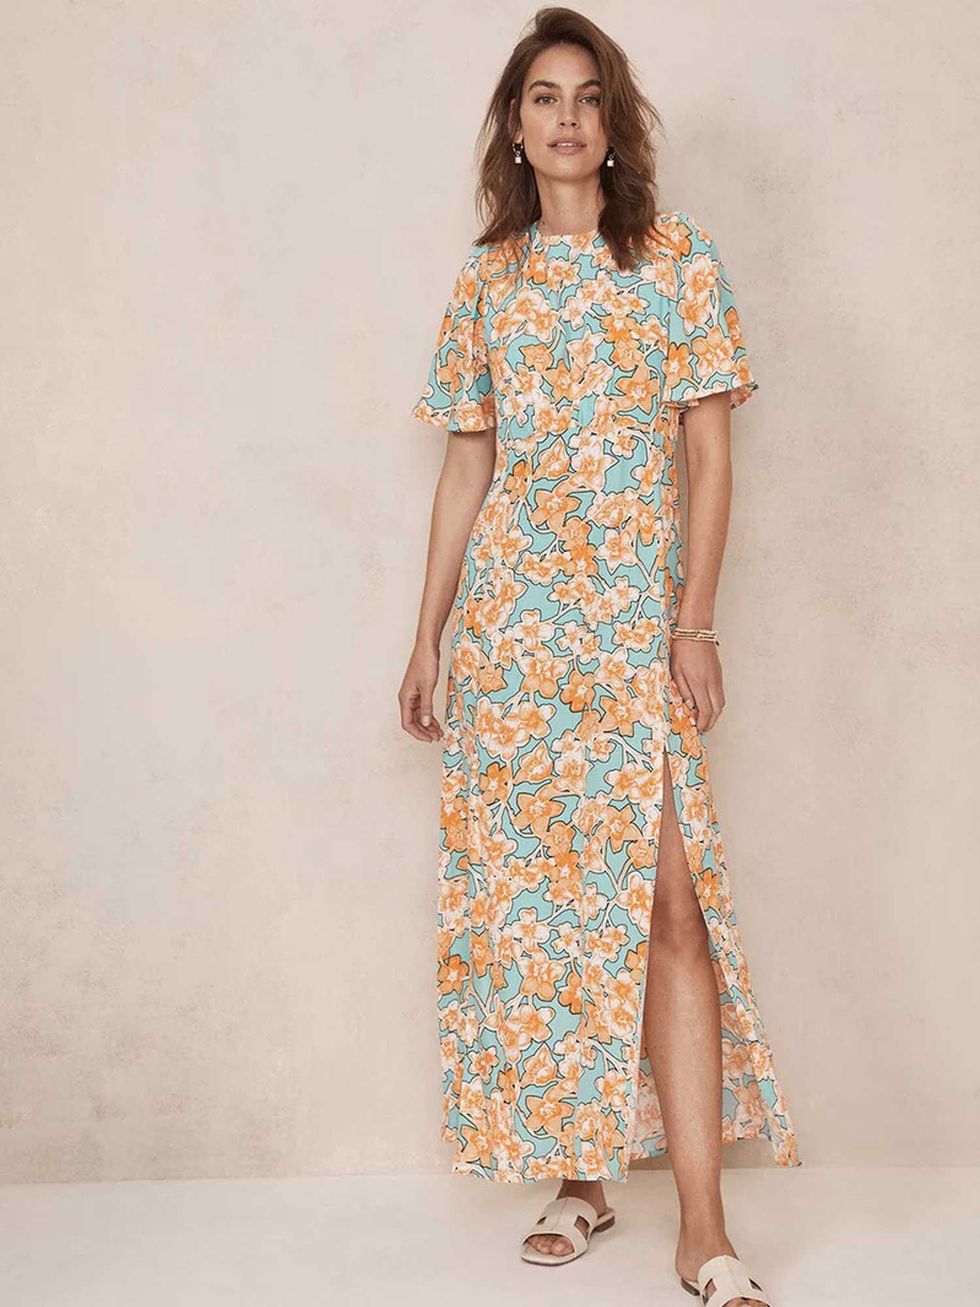 Mint Velvet has launched its summer sale-with up to 60% off now